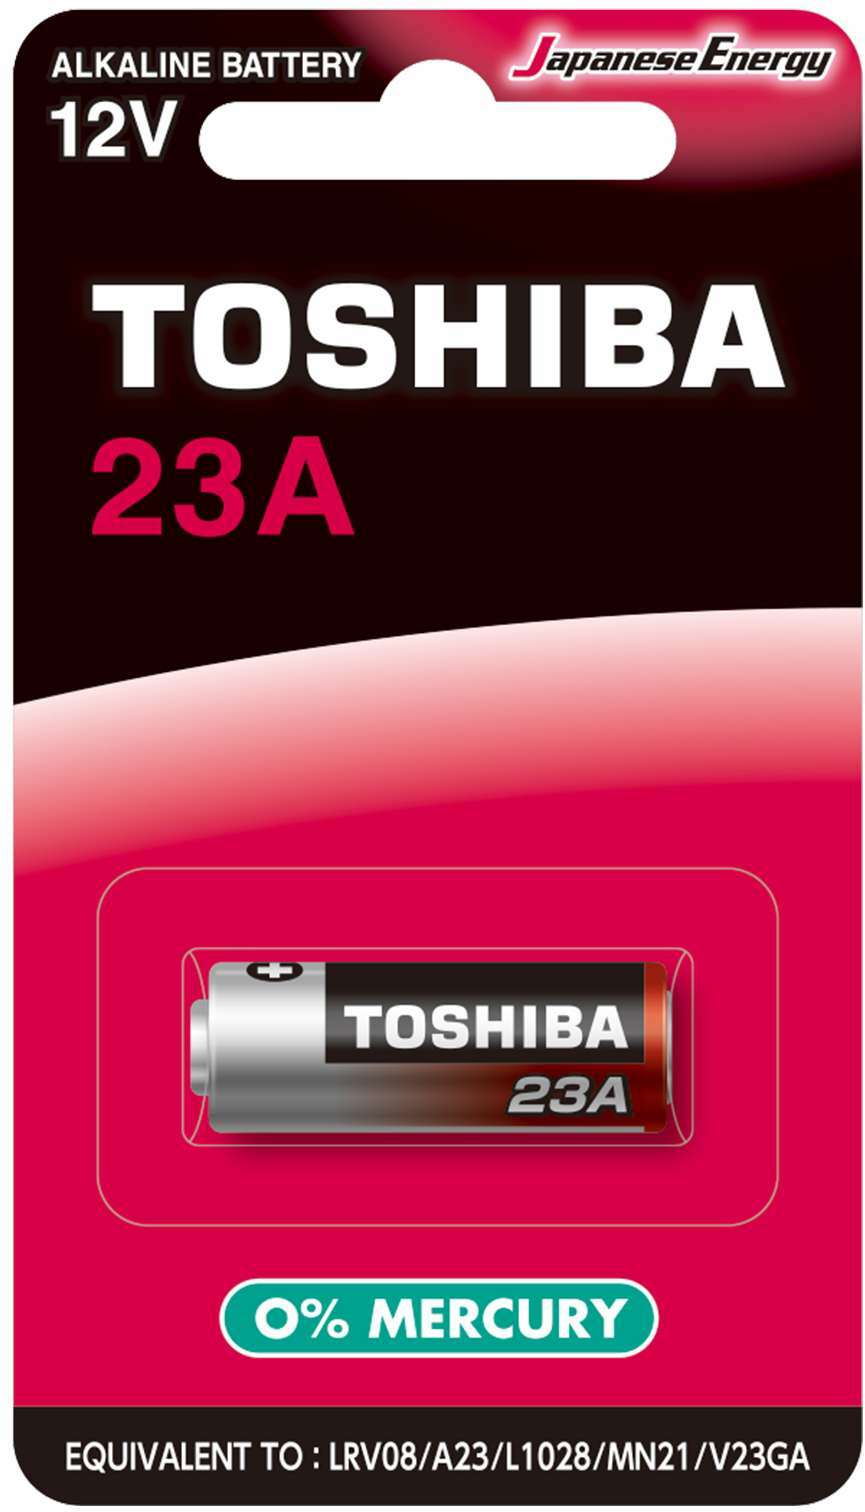 Toshiba 23a - Battery - Main picture